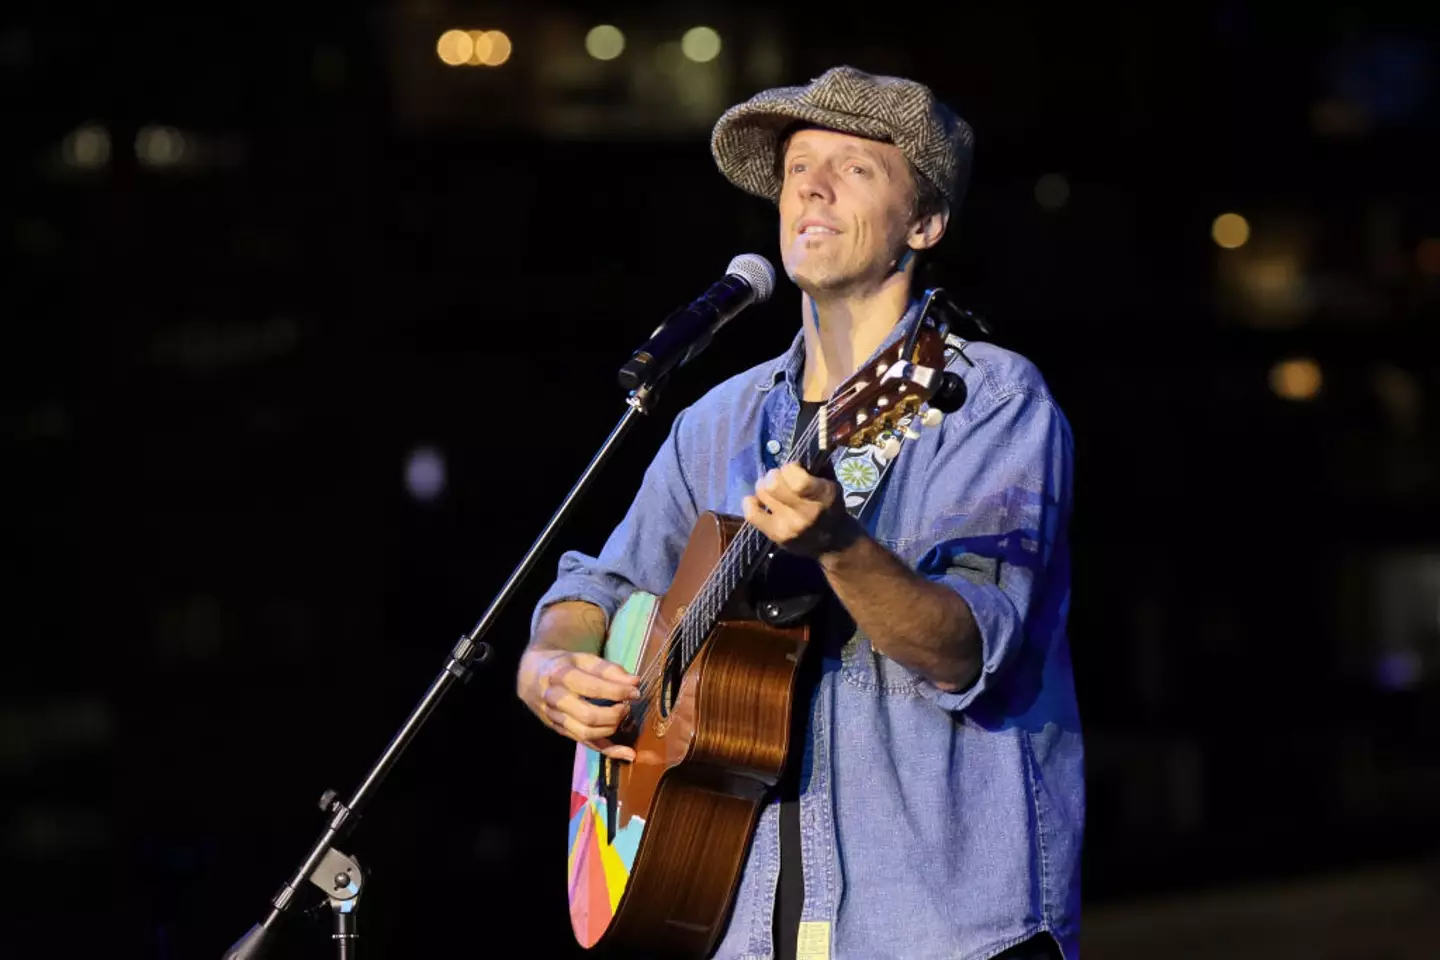 Jason Mraz came out in 2018. (Rebecca Sapp/Getty Images for The Recording Academy)